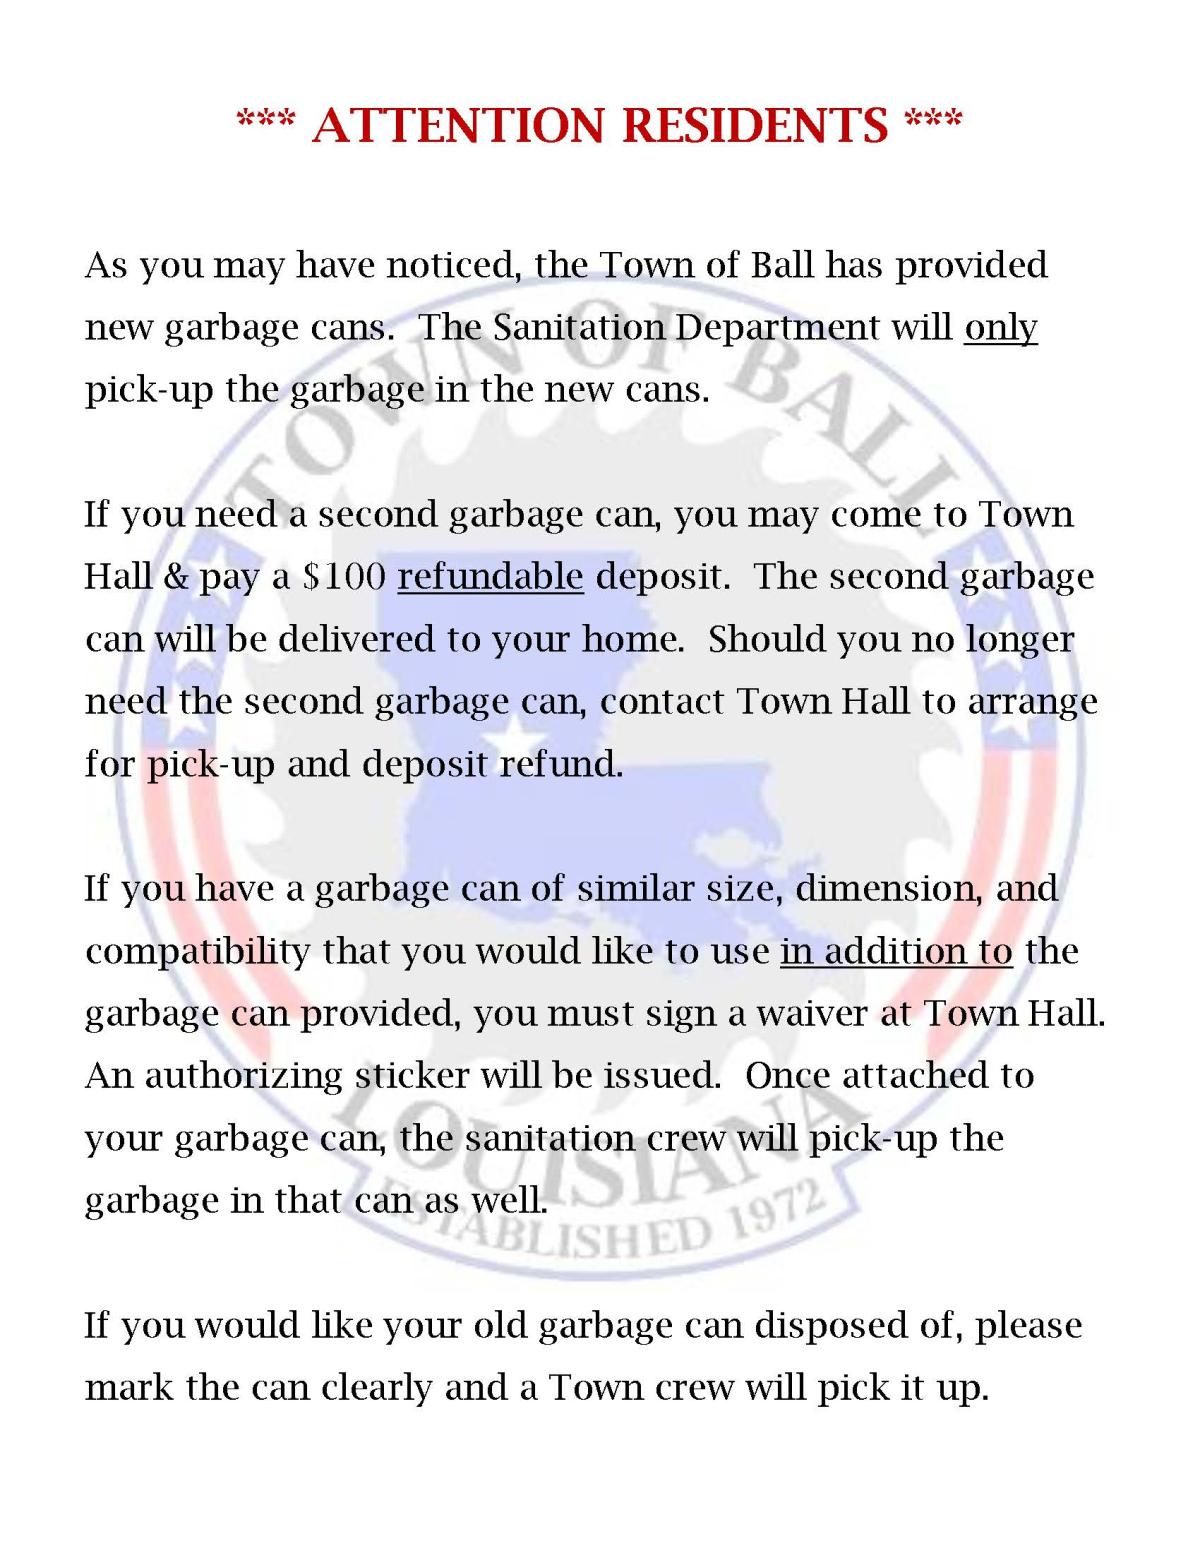 New Garbage Can Information